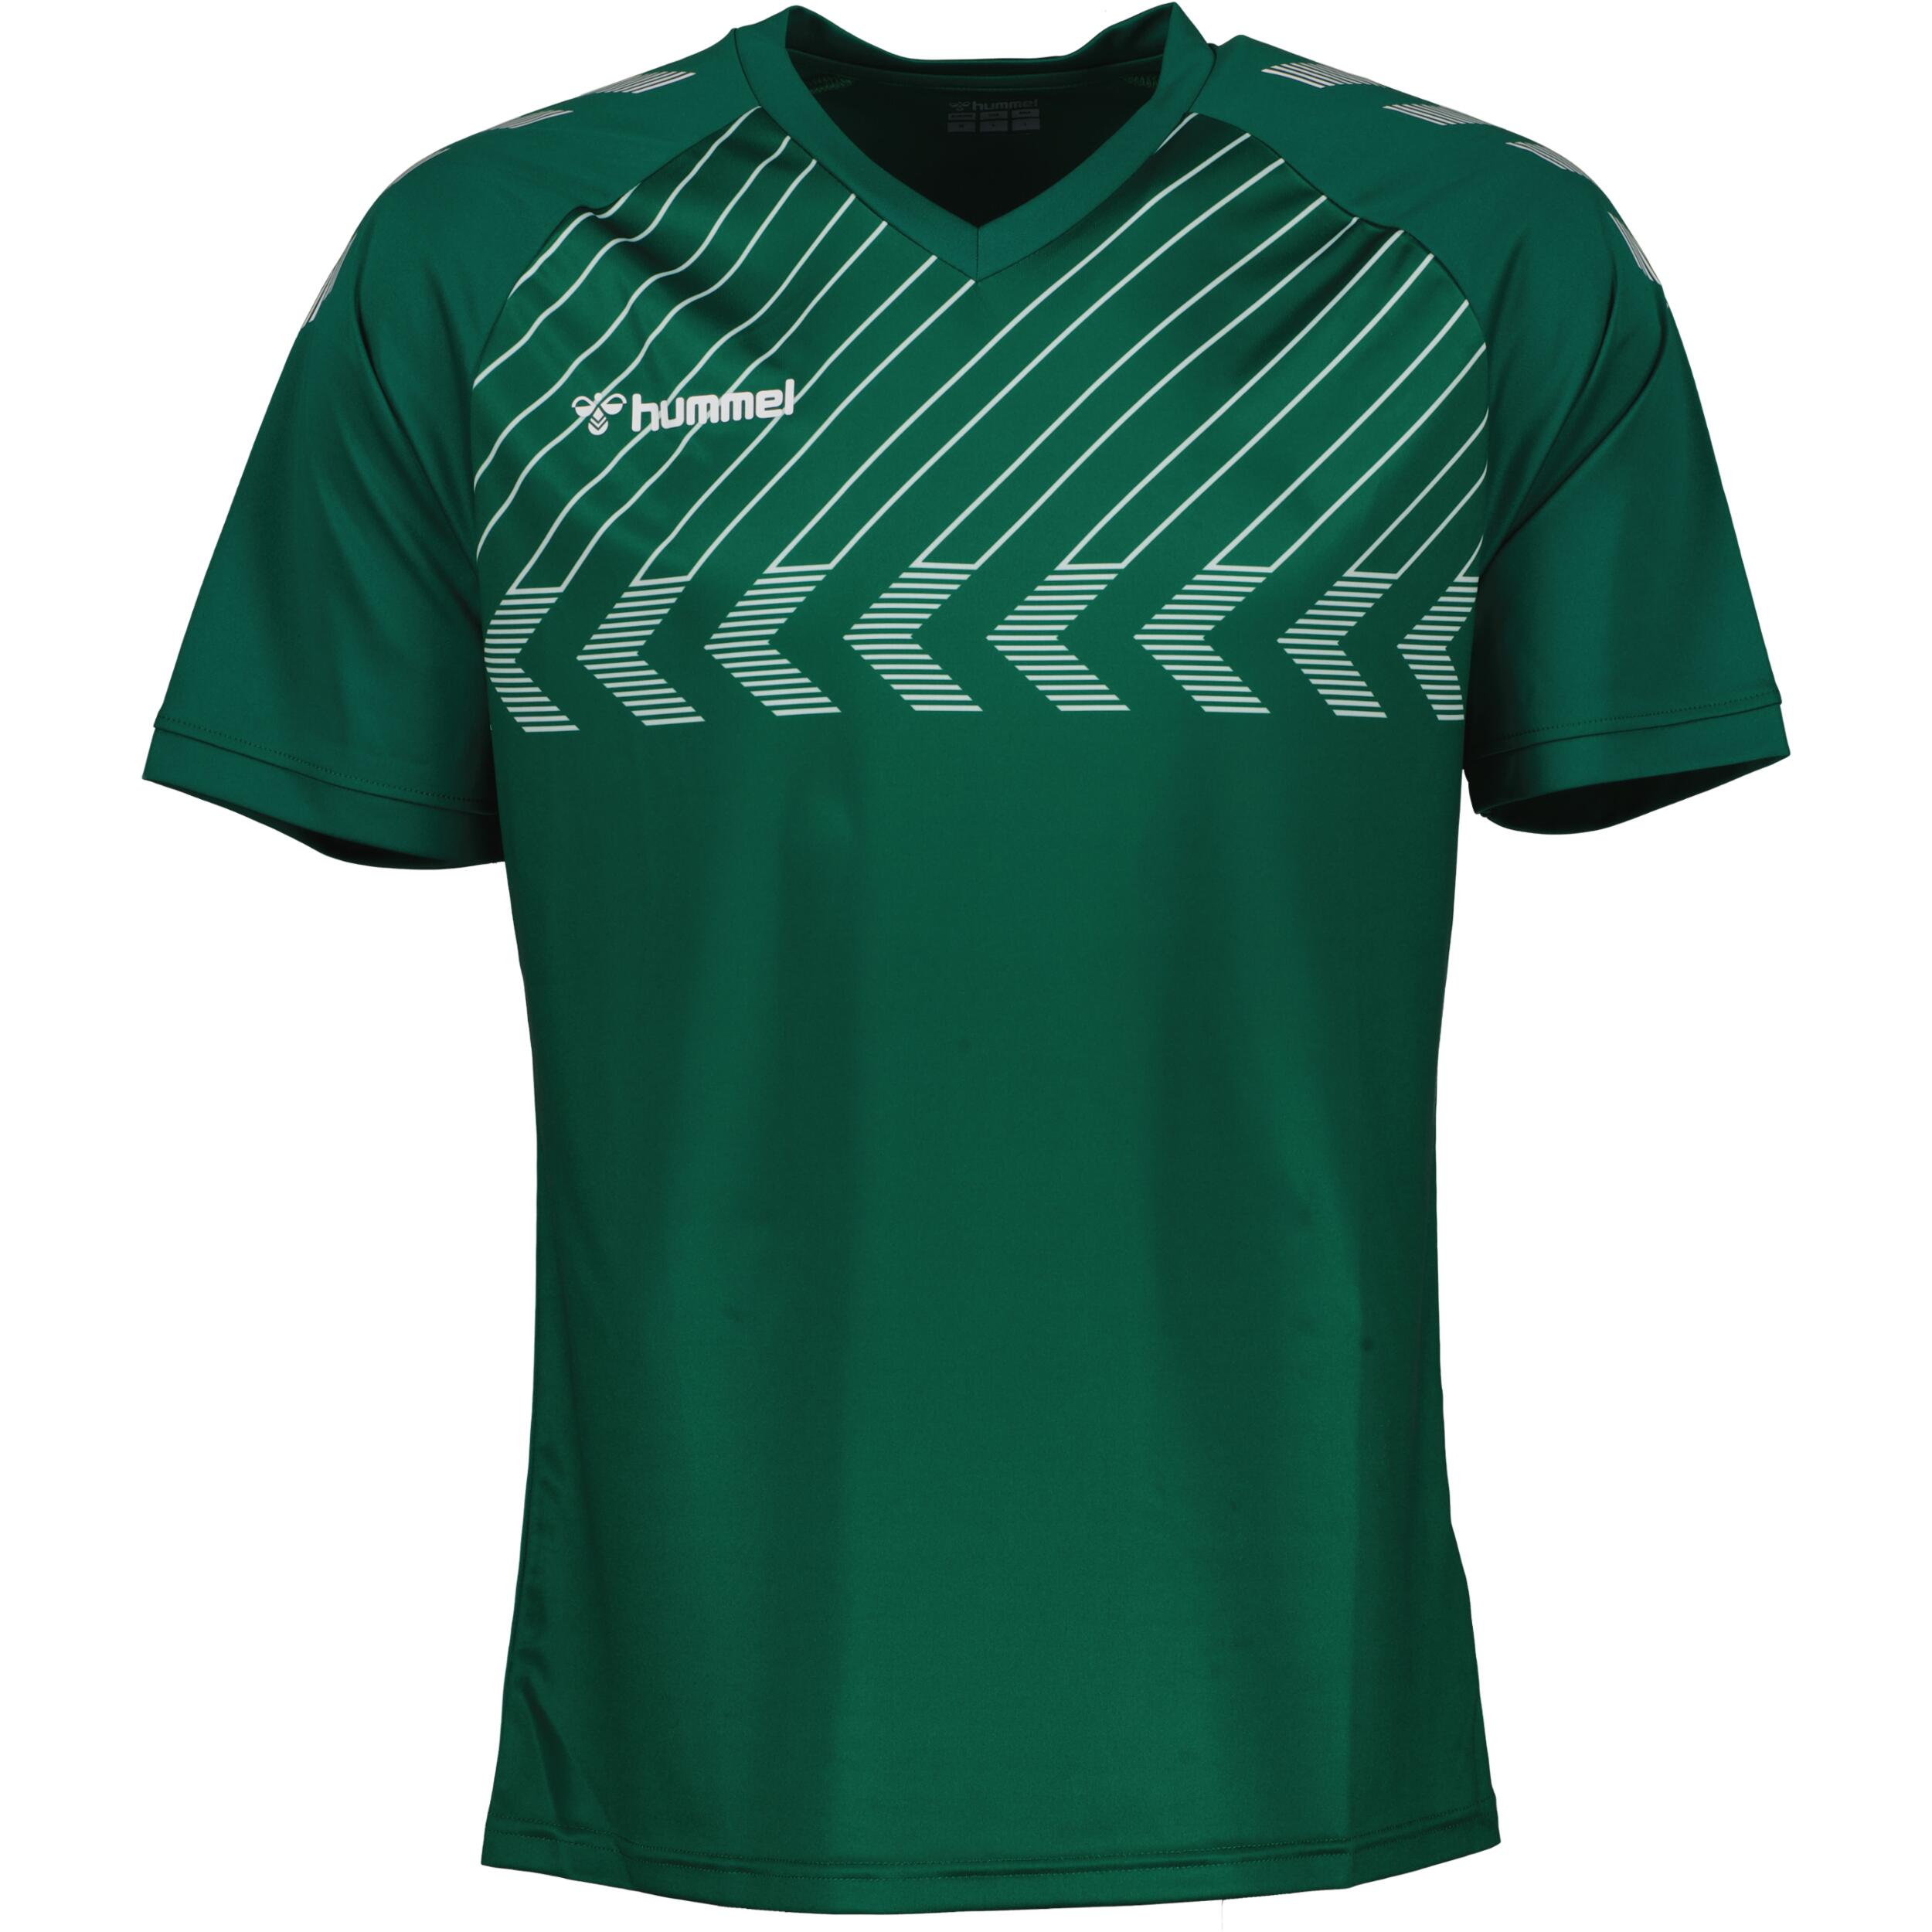 HUMMEL Poly jersey for men, great for football, in evergreen